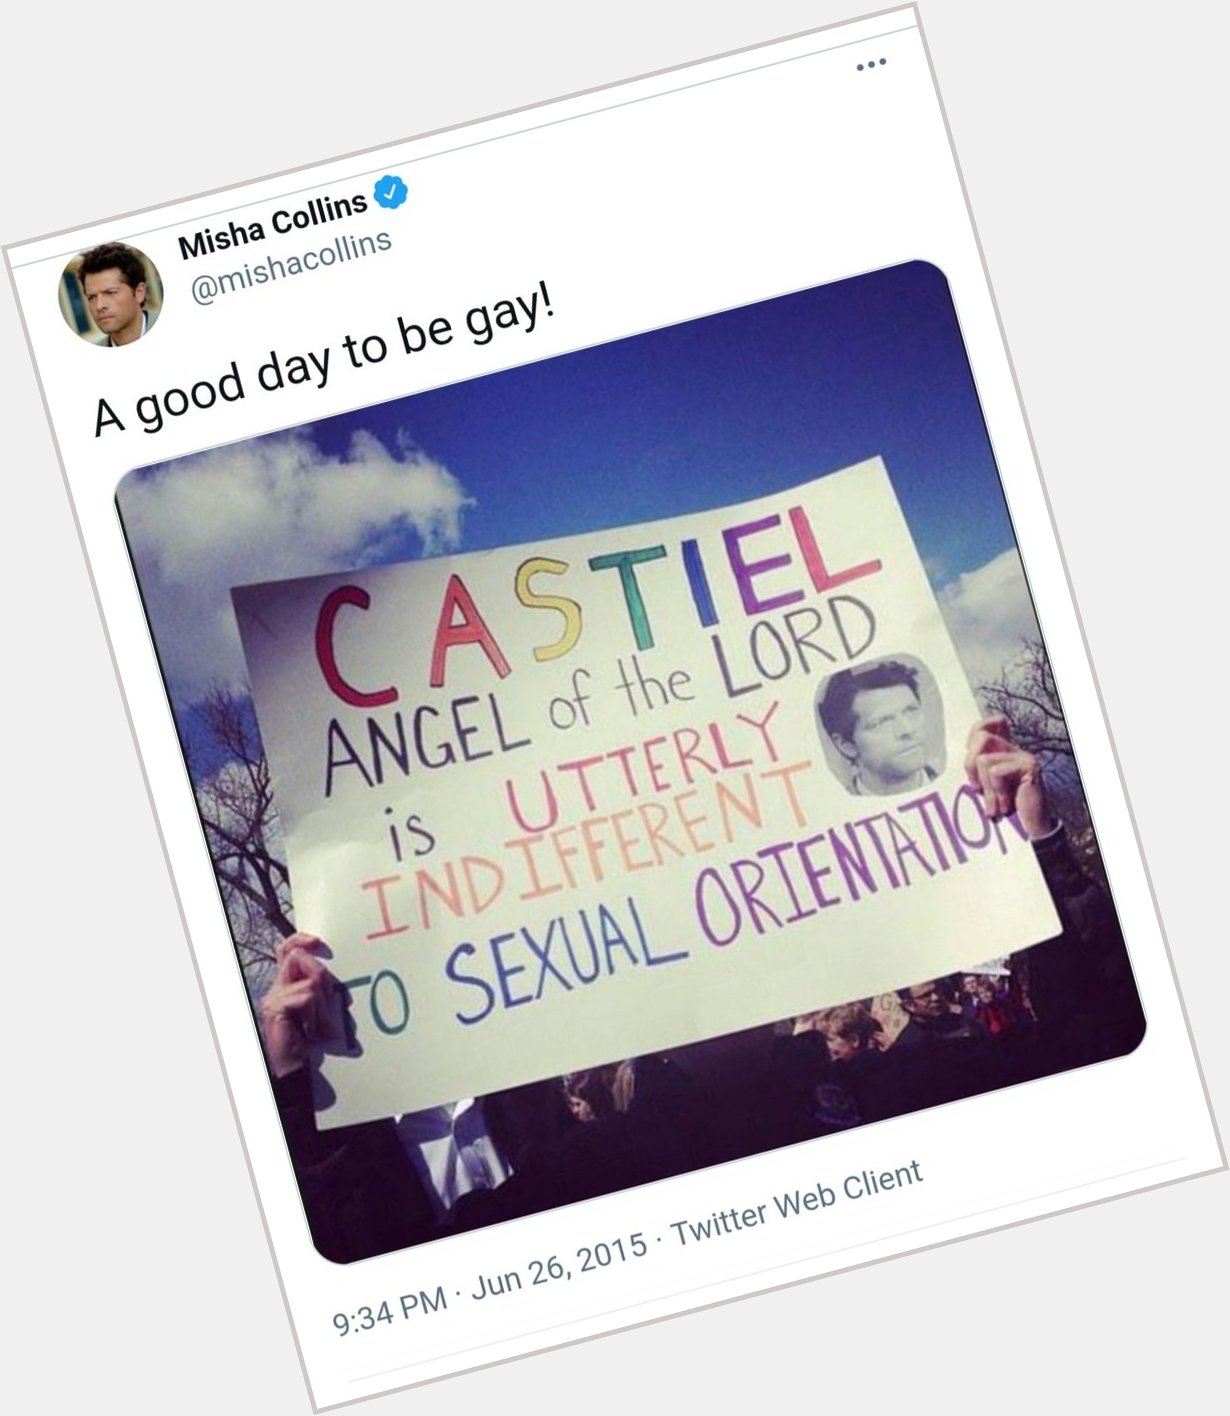 Misha Collins spreading the gay agenda like the king he is.
Happy birthday, King. 